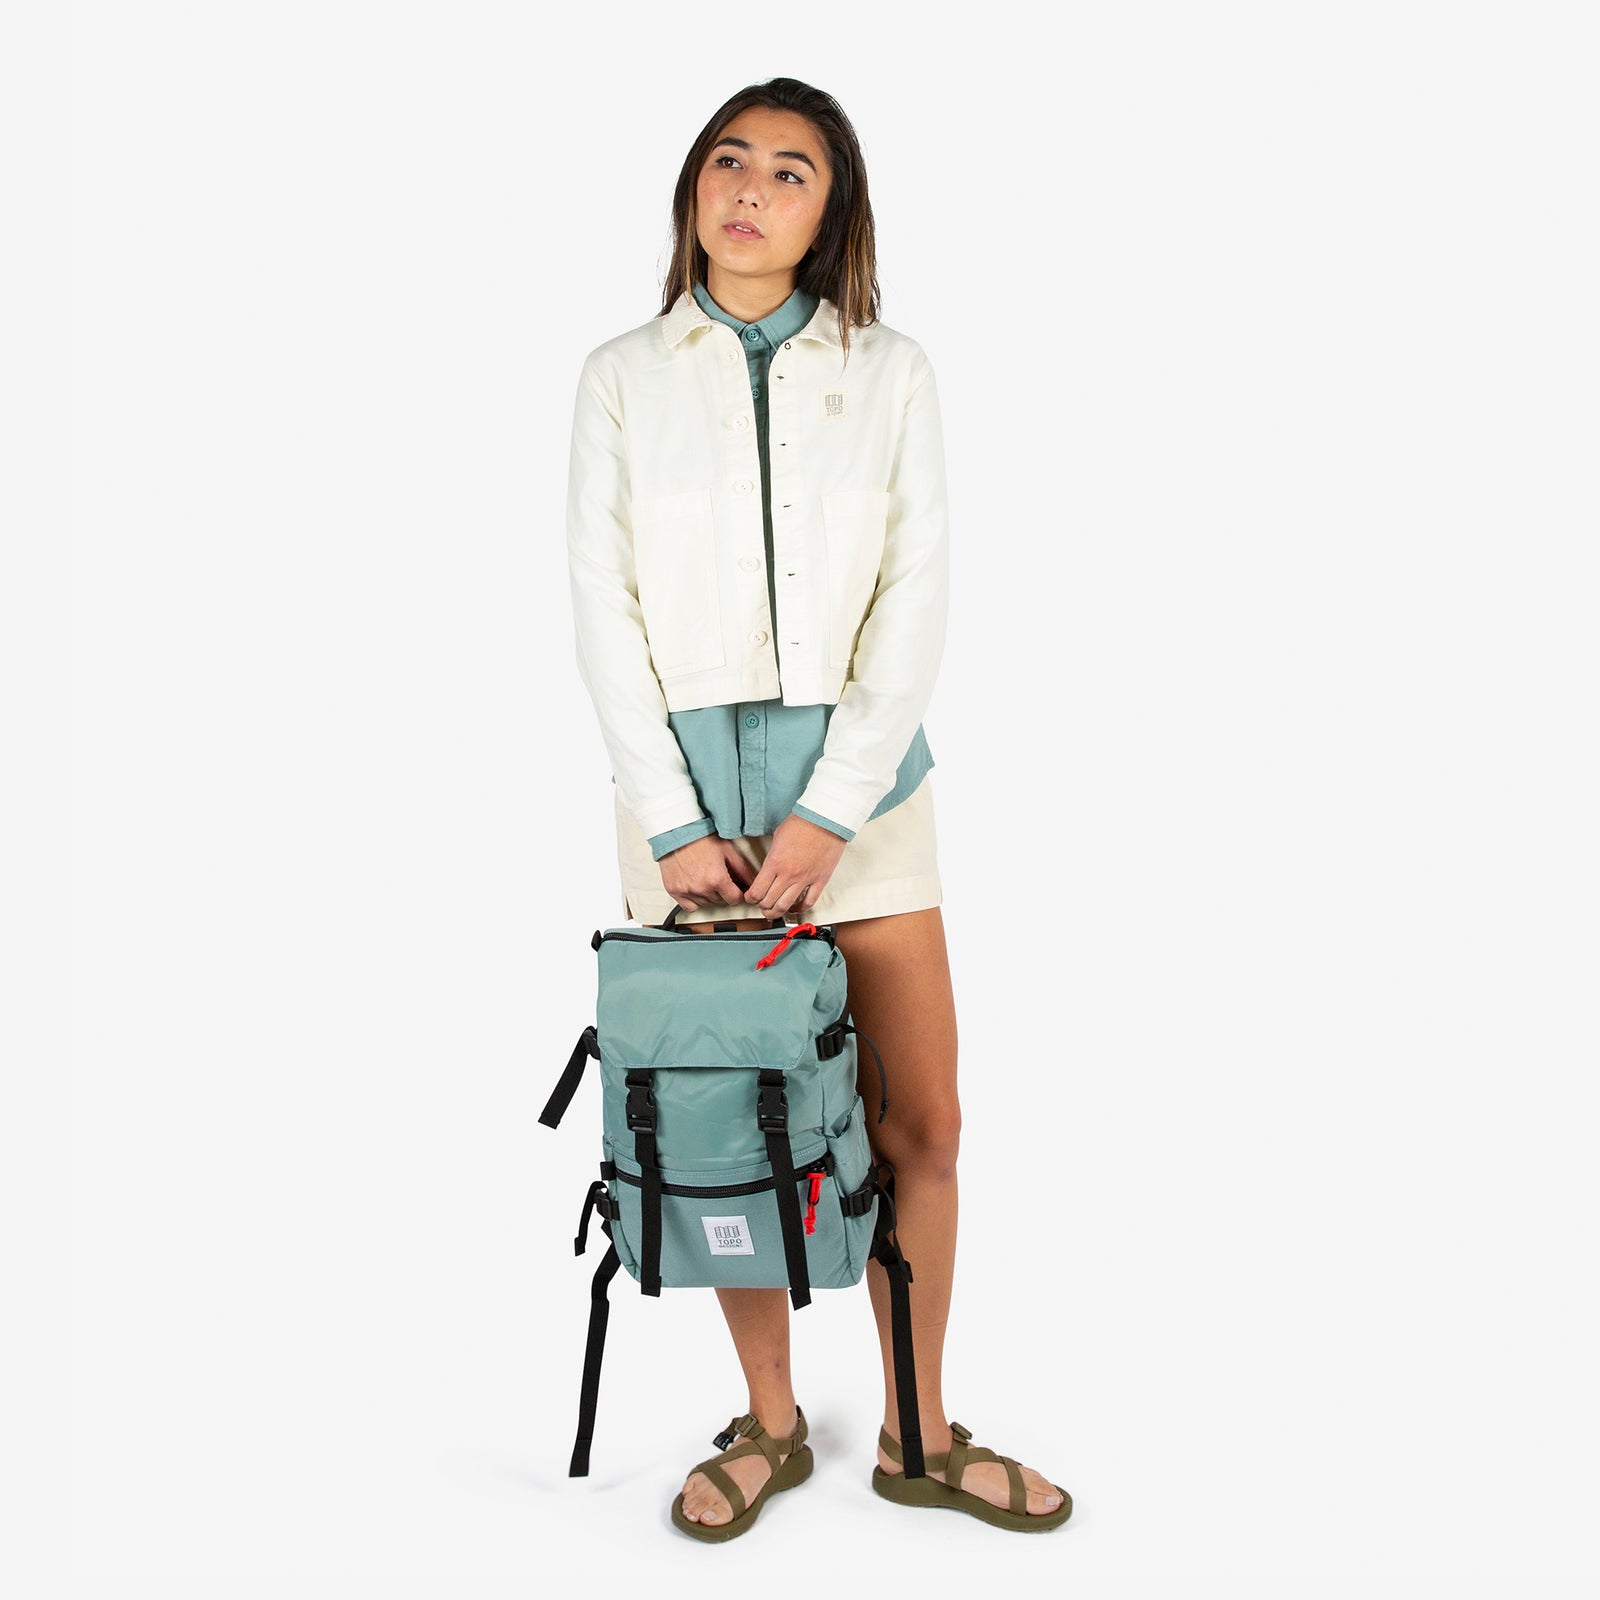 Topo Designs Rover Pack Classic in "Sage" green held by model with top carry handle.